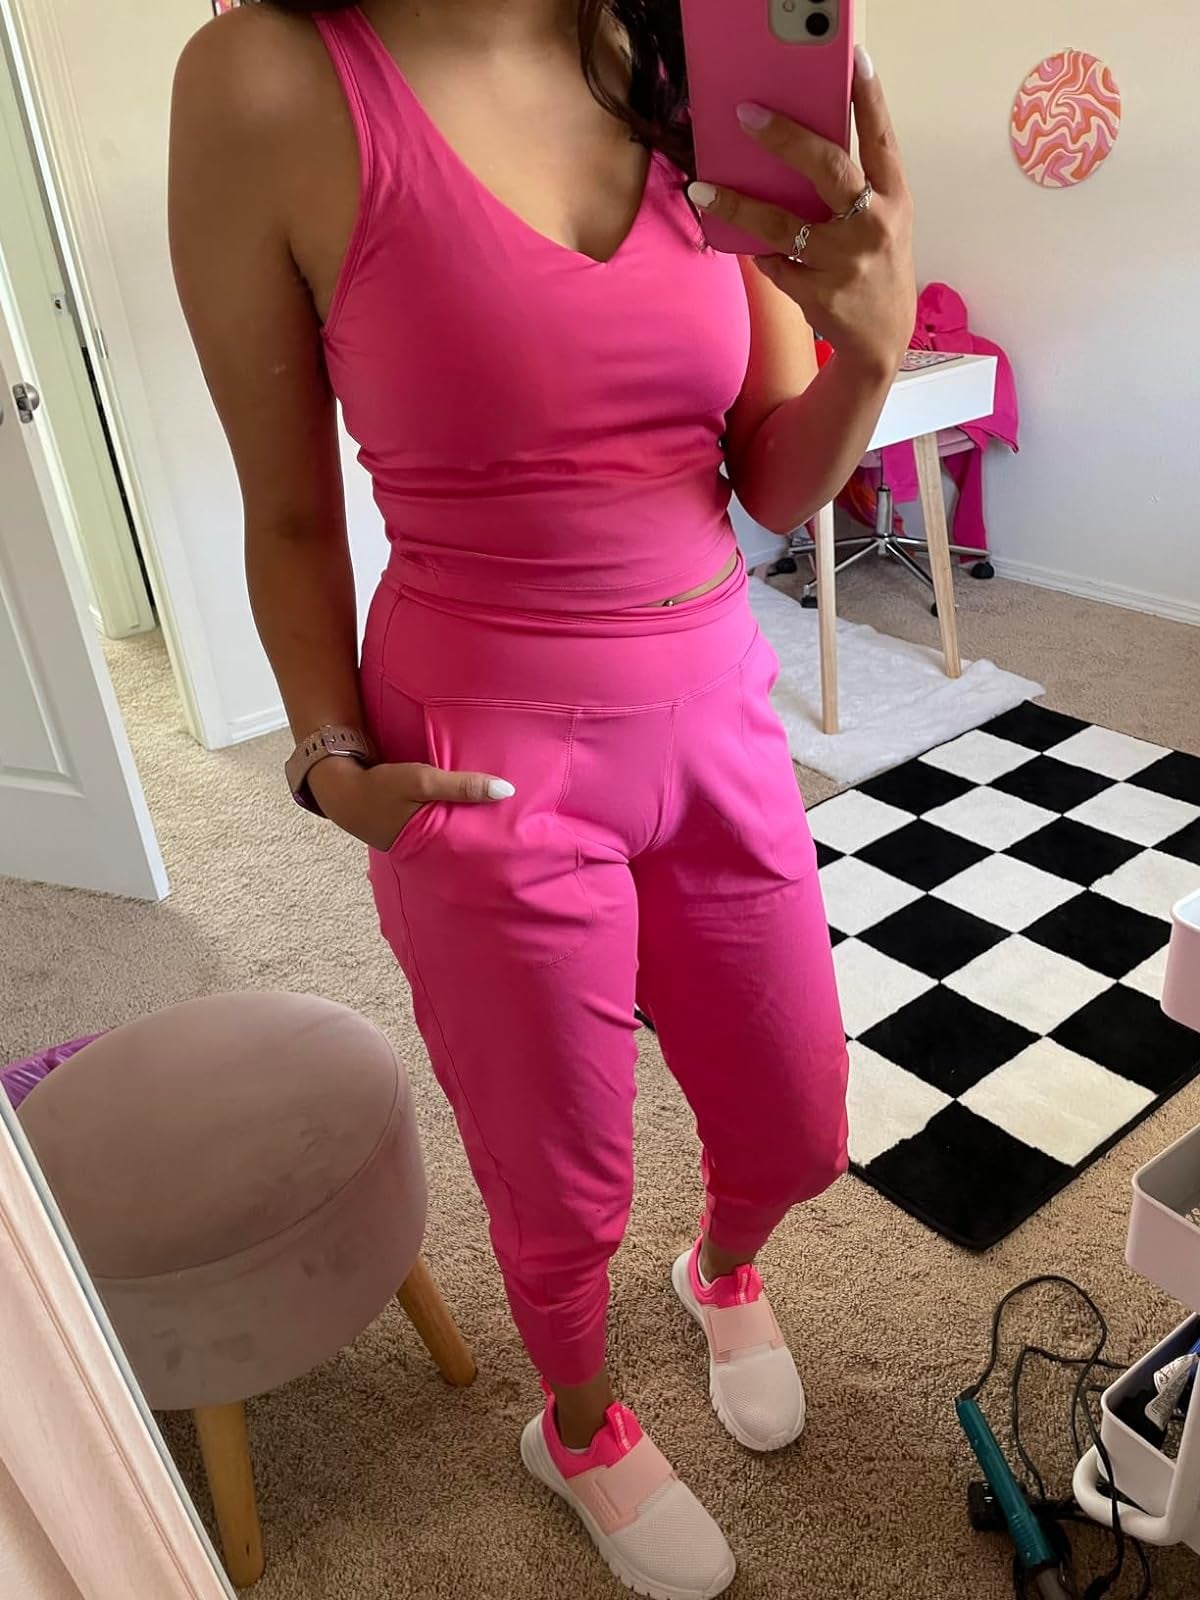 What Goes Well With Pink Sweatpants? – solowomen